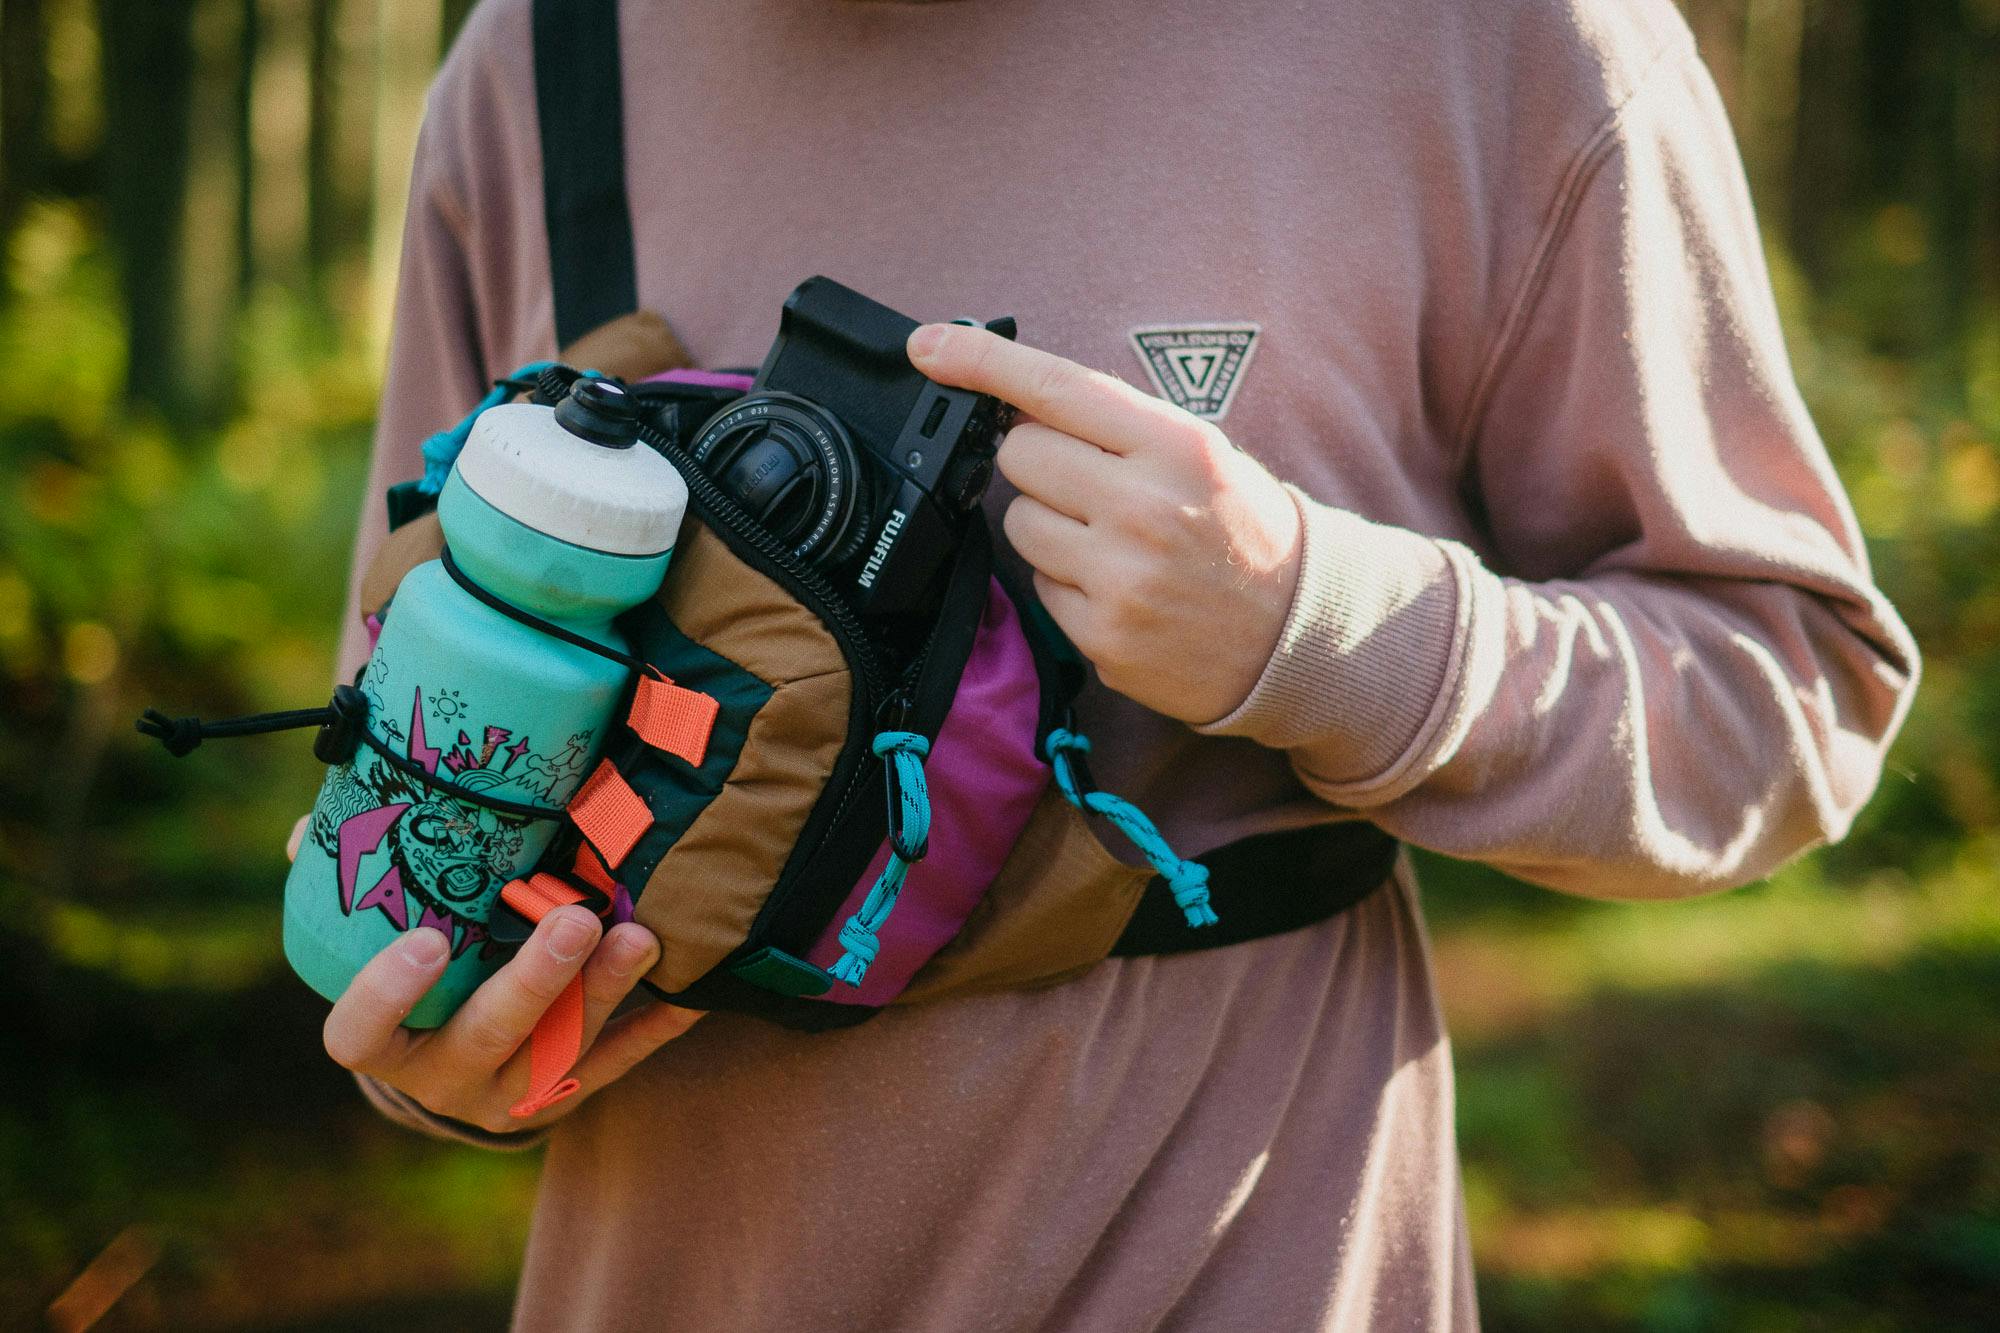 The hip pack loaded with a bottle and camera.